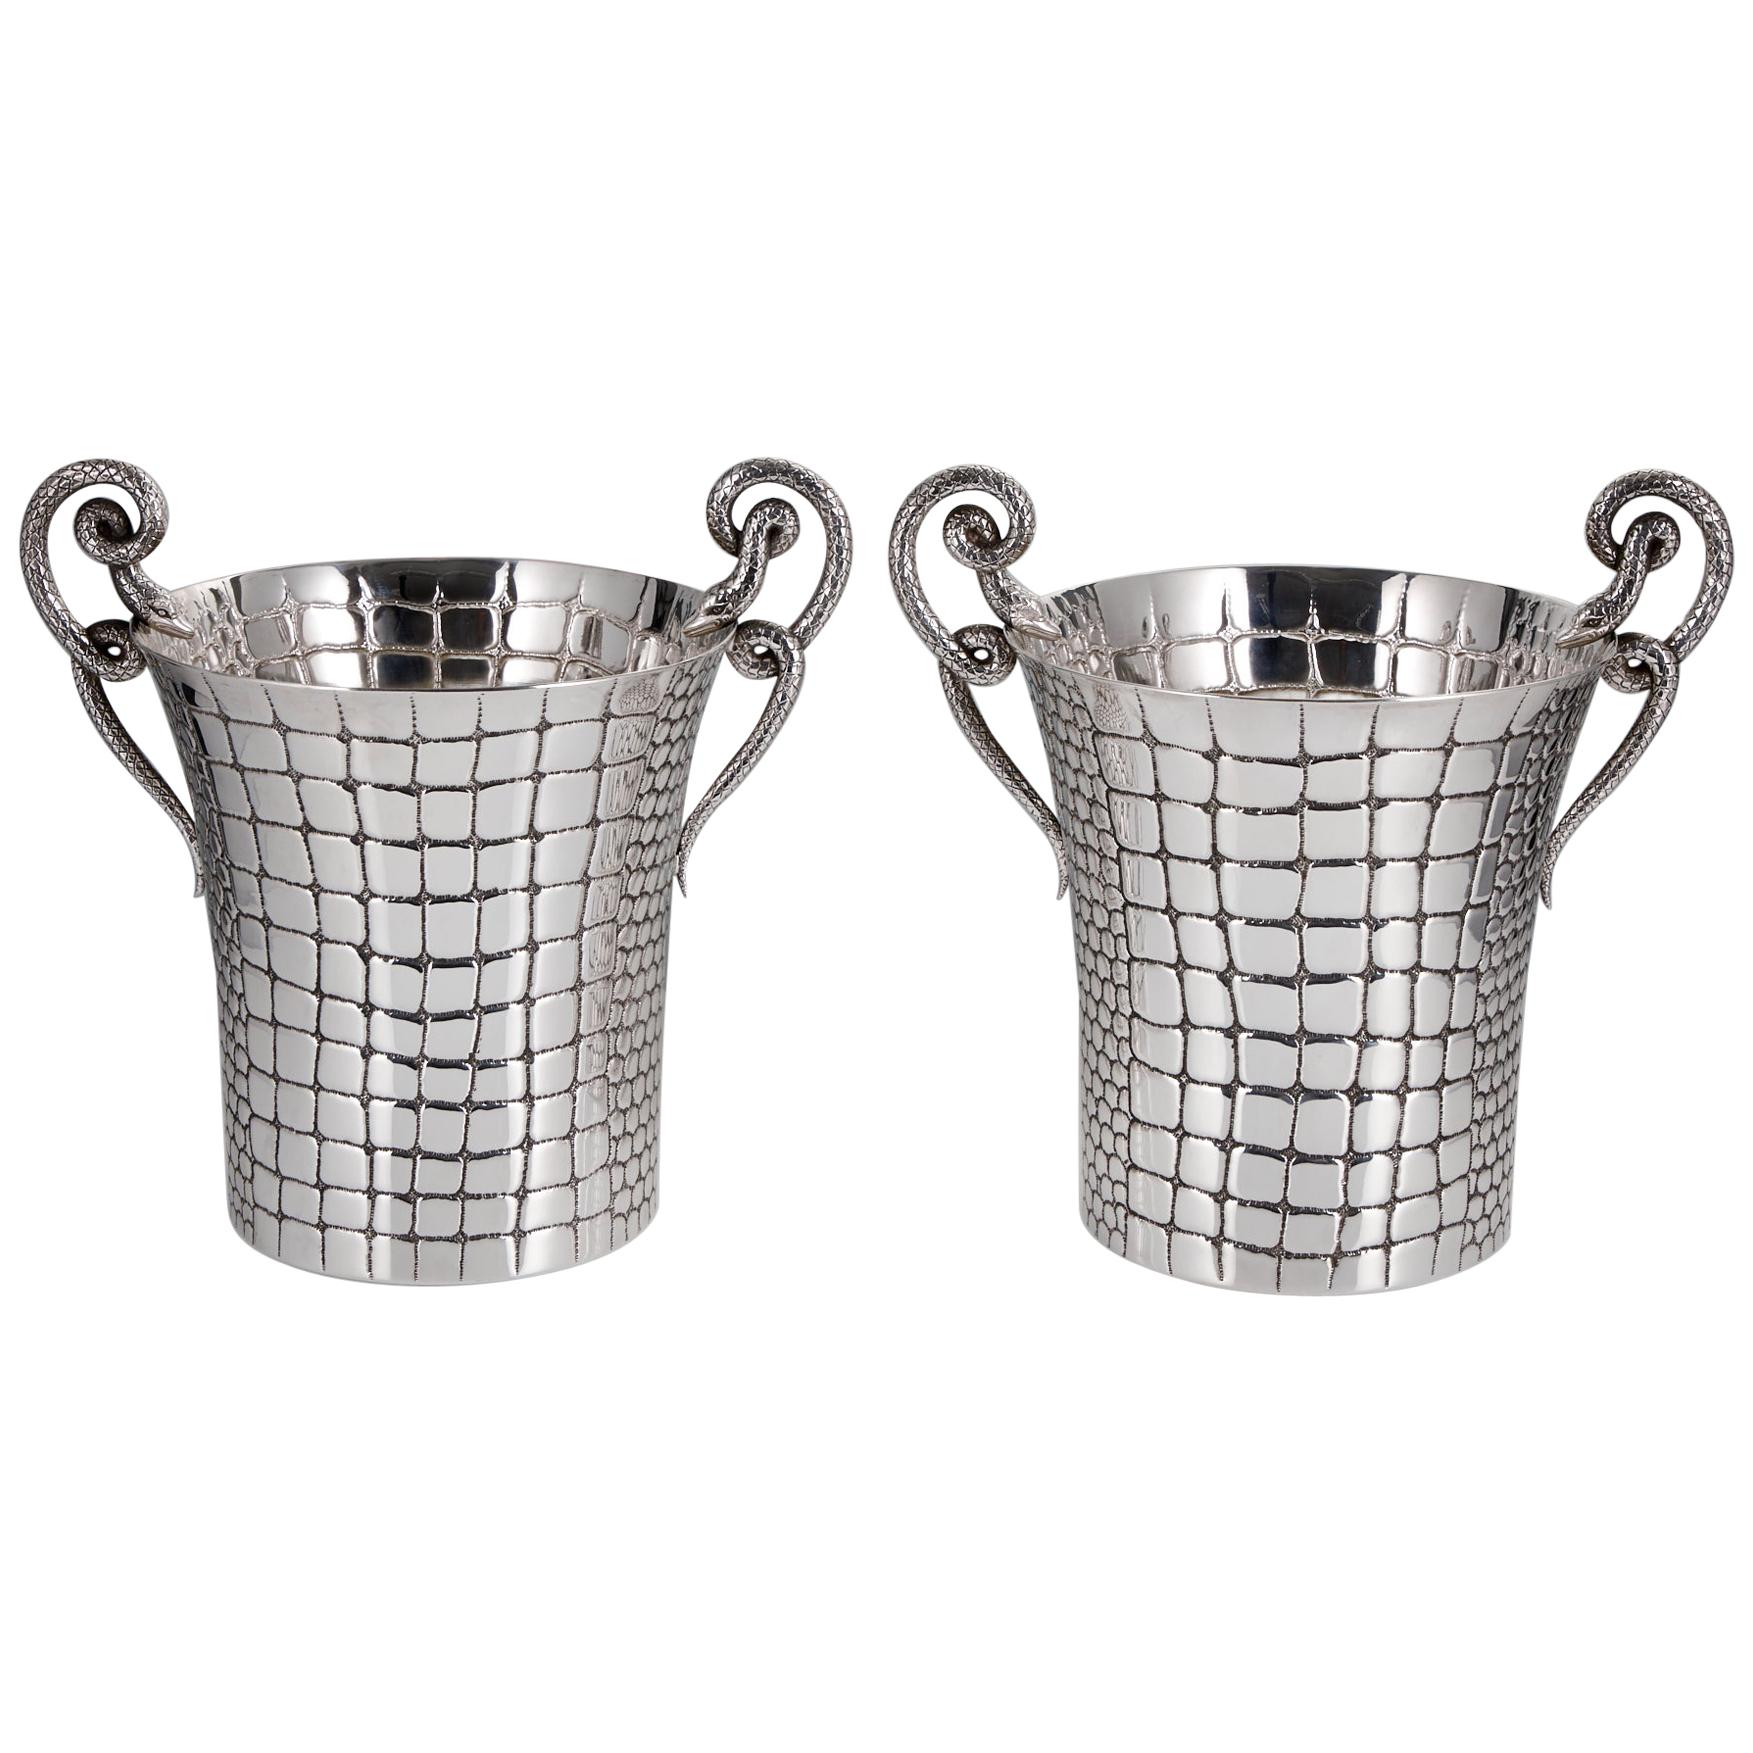 Mid-20th Century Silver Champagne Cooler Pair by Paolo Scavia Circa 1945-1950 